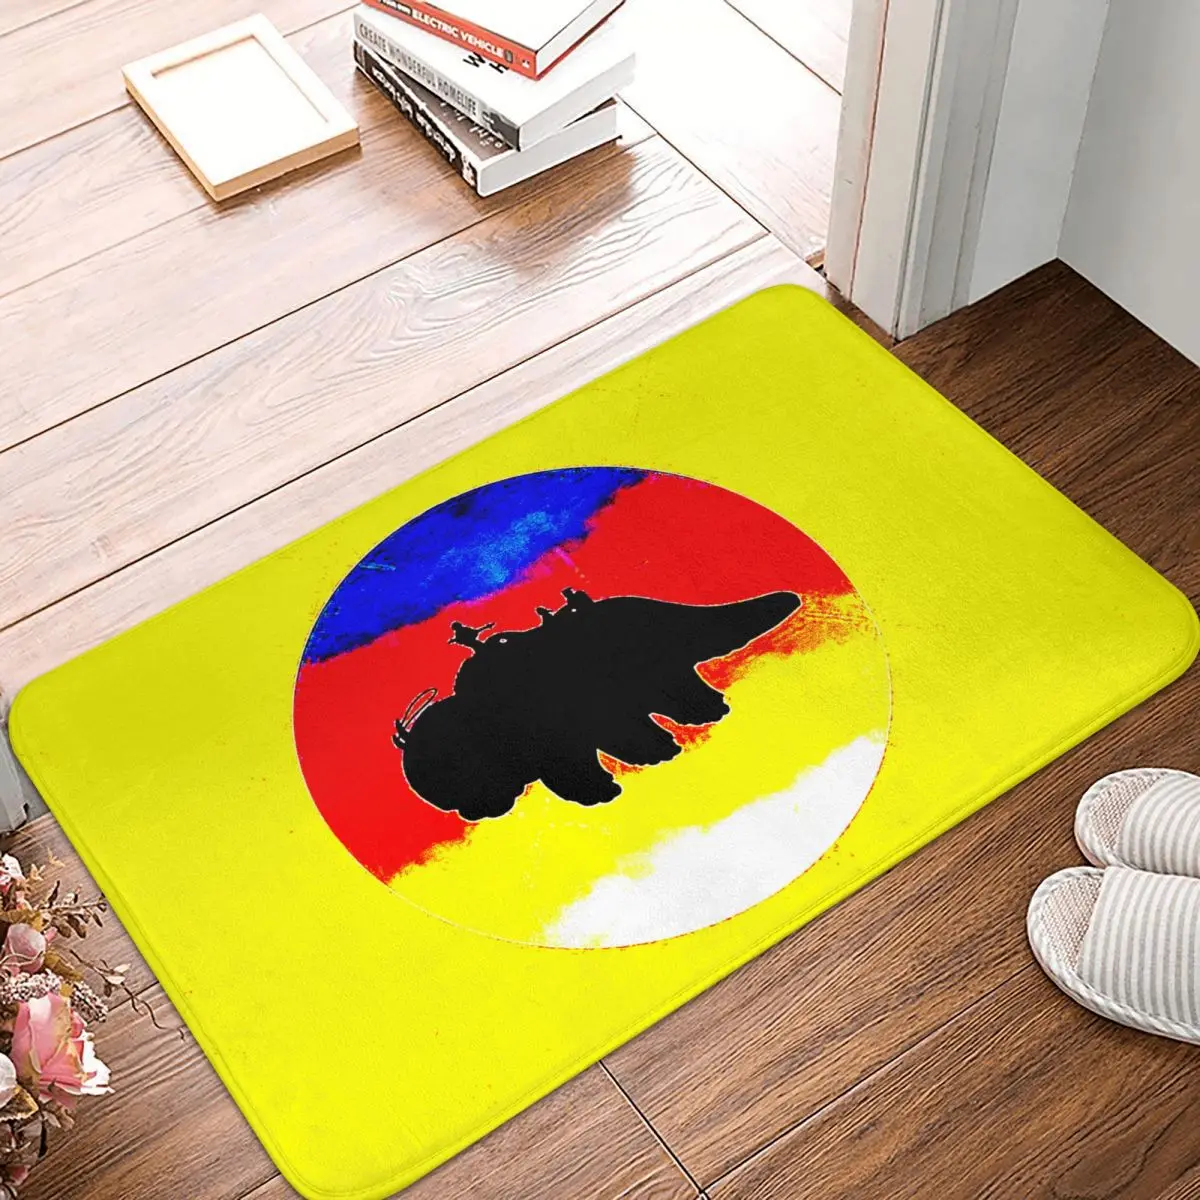 Appa In The SkyBath Mat Avatar The Last Airbender Doormat Kitchen Carpet Outdoor Rug Home Decoration - Avatar The Last Airbender Store